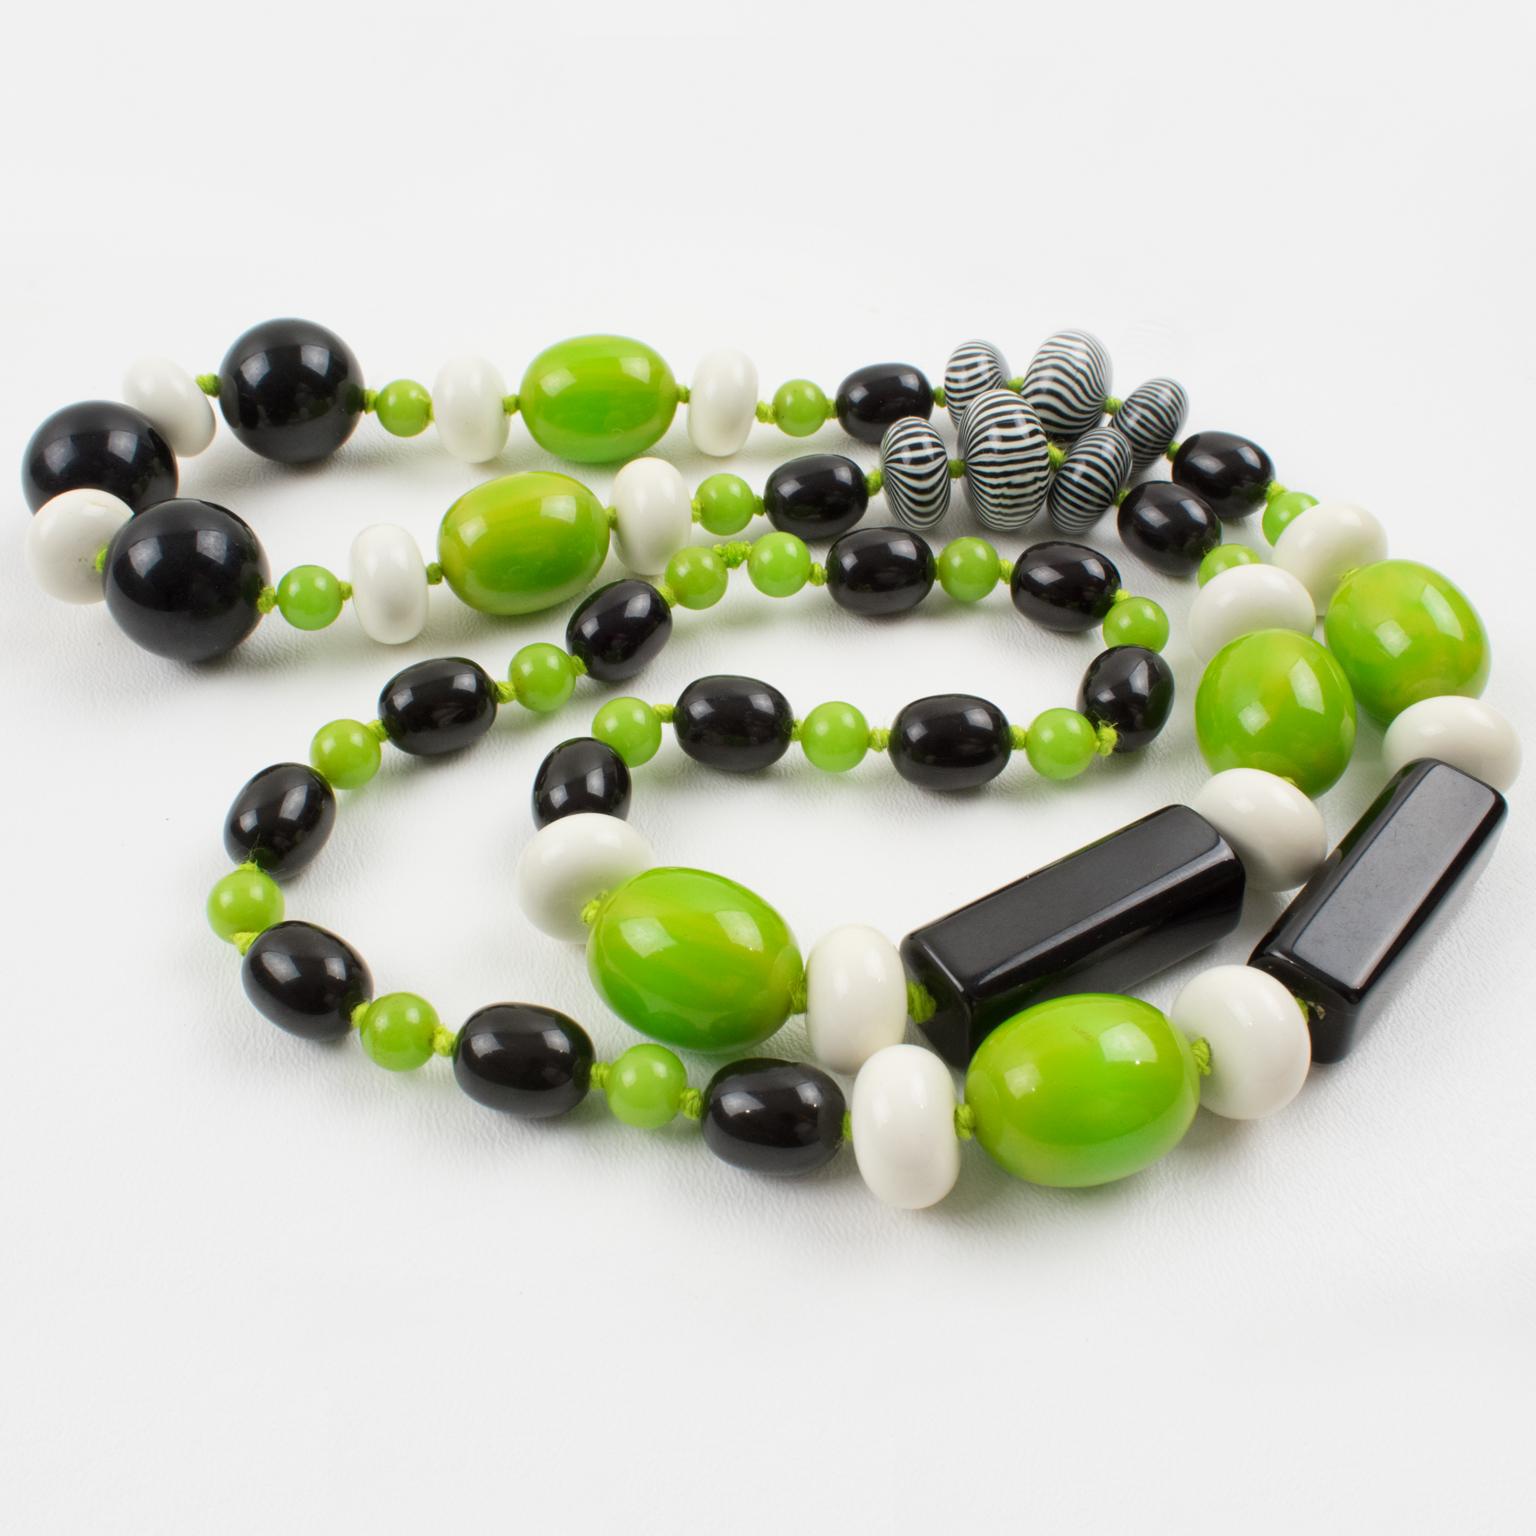 green and black beads